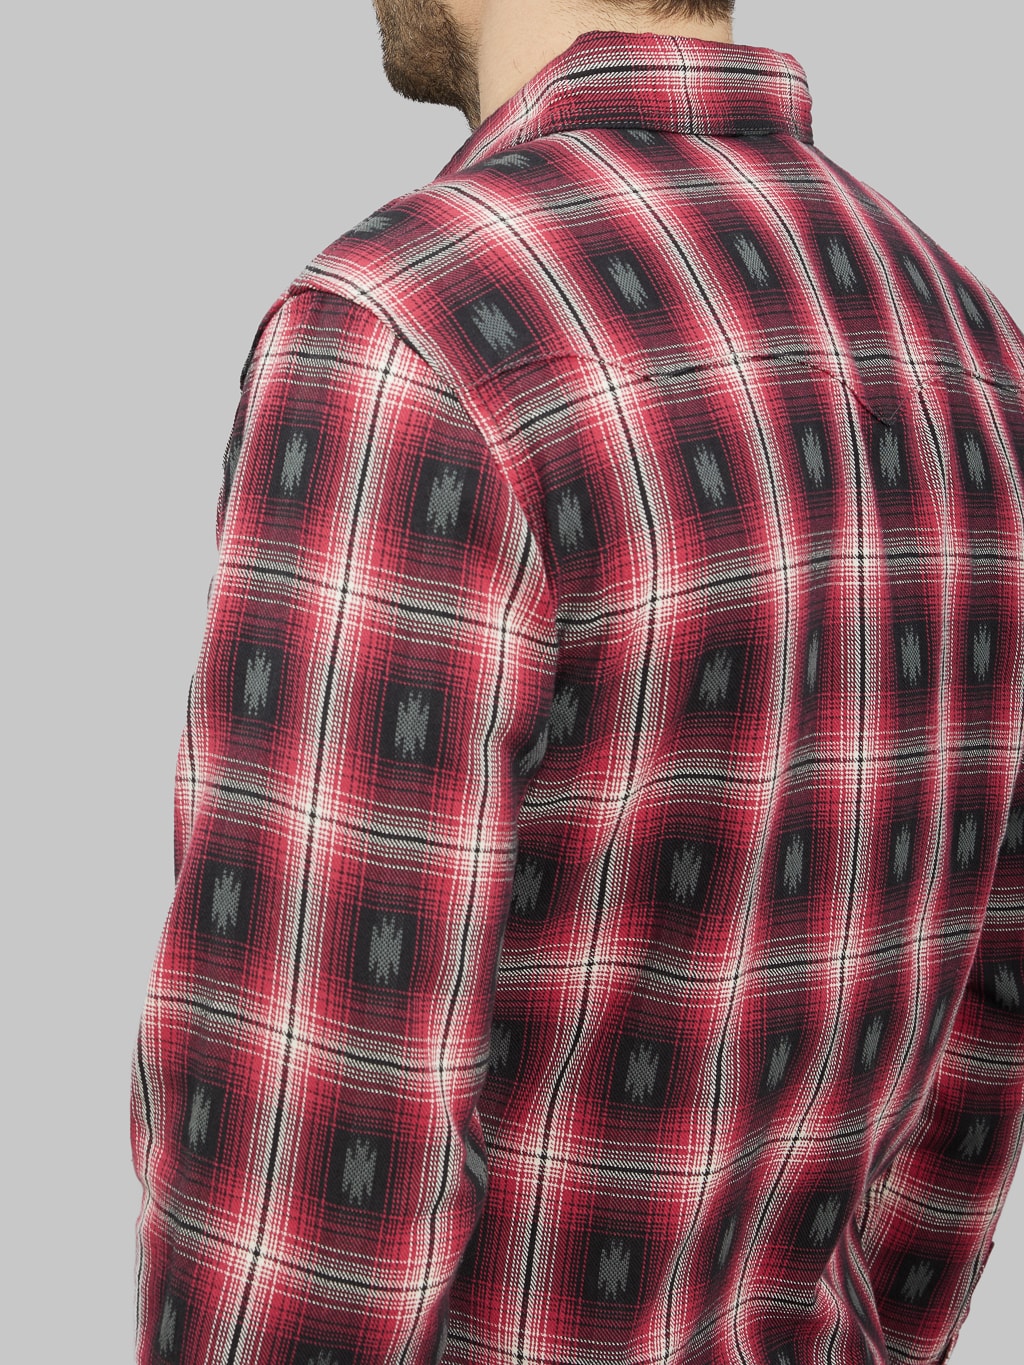 The Flat Head Native Check Western Shirt Red back details